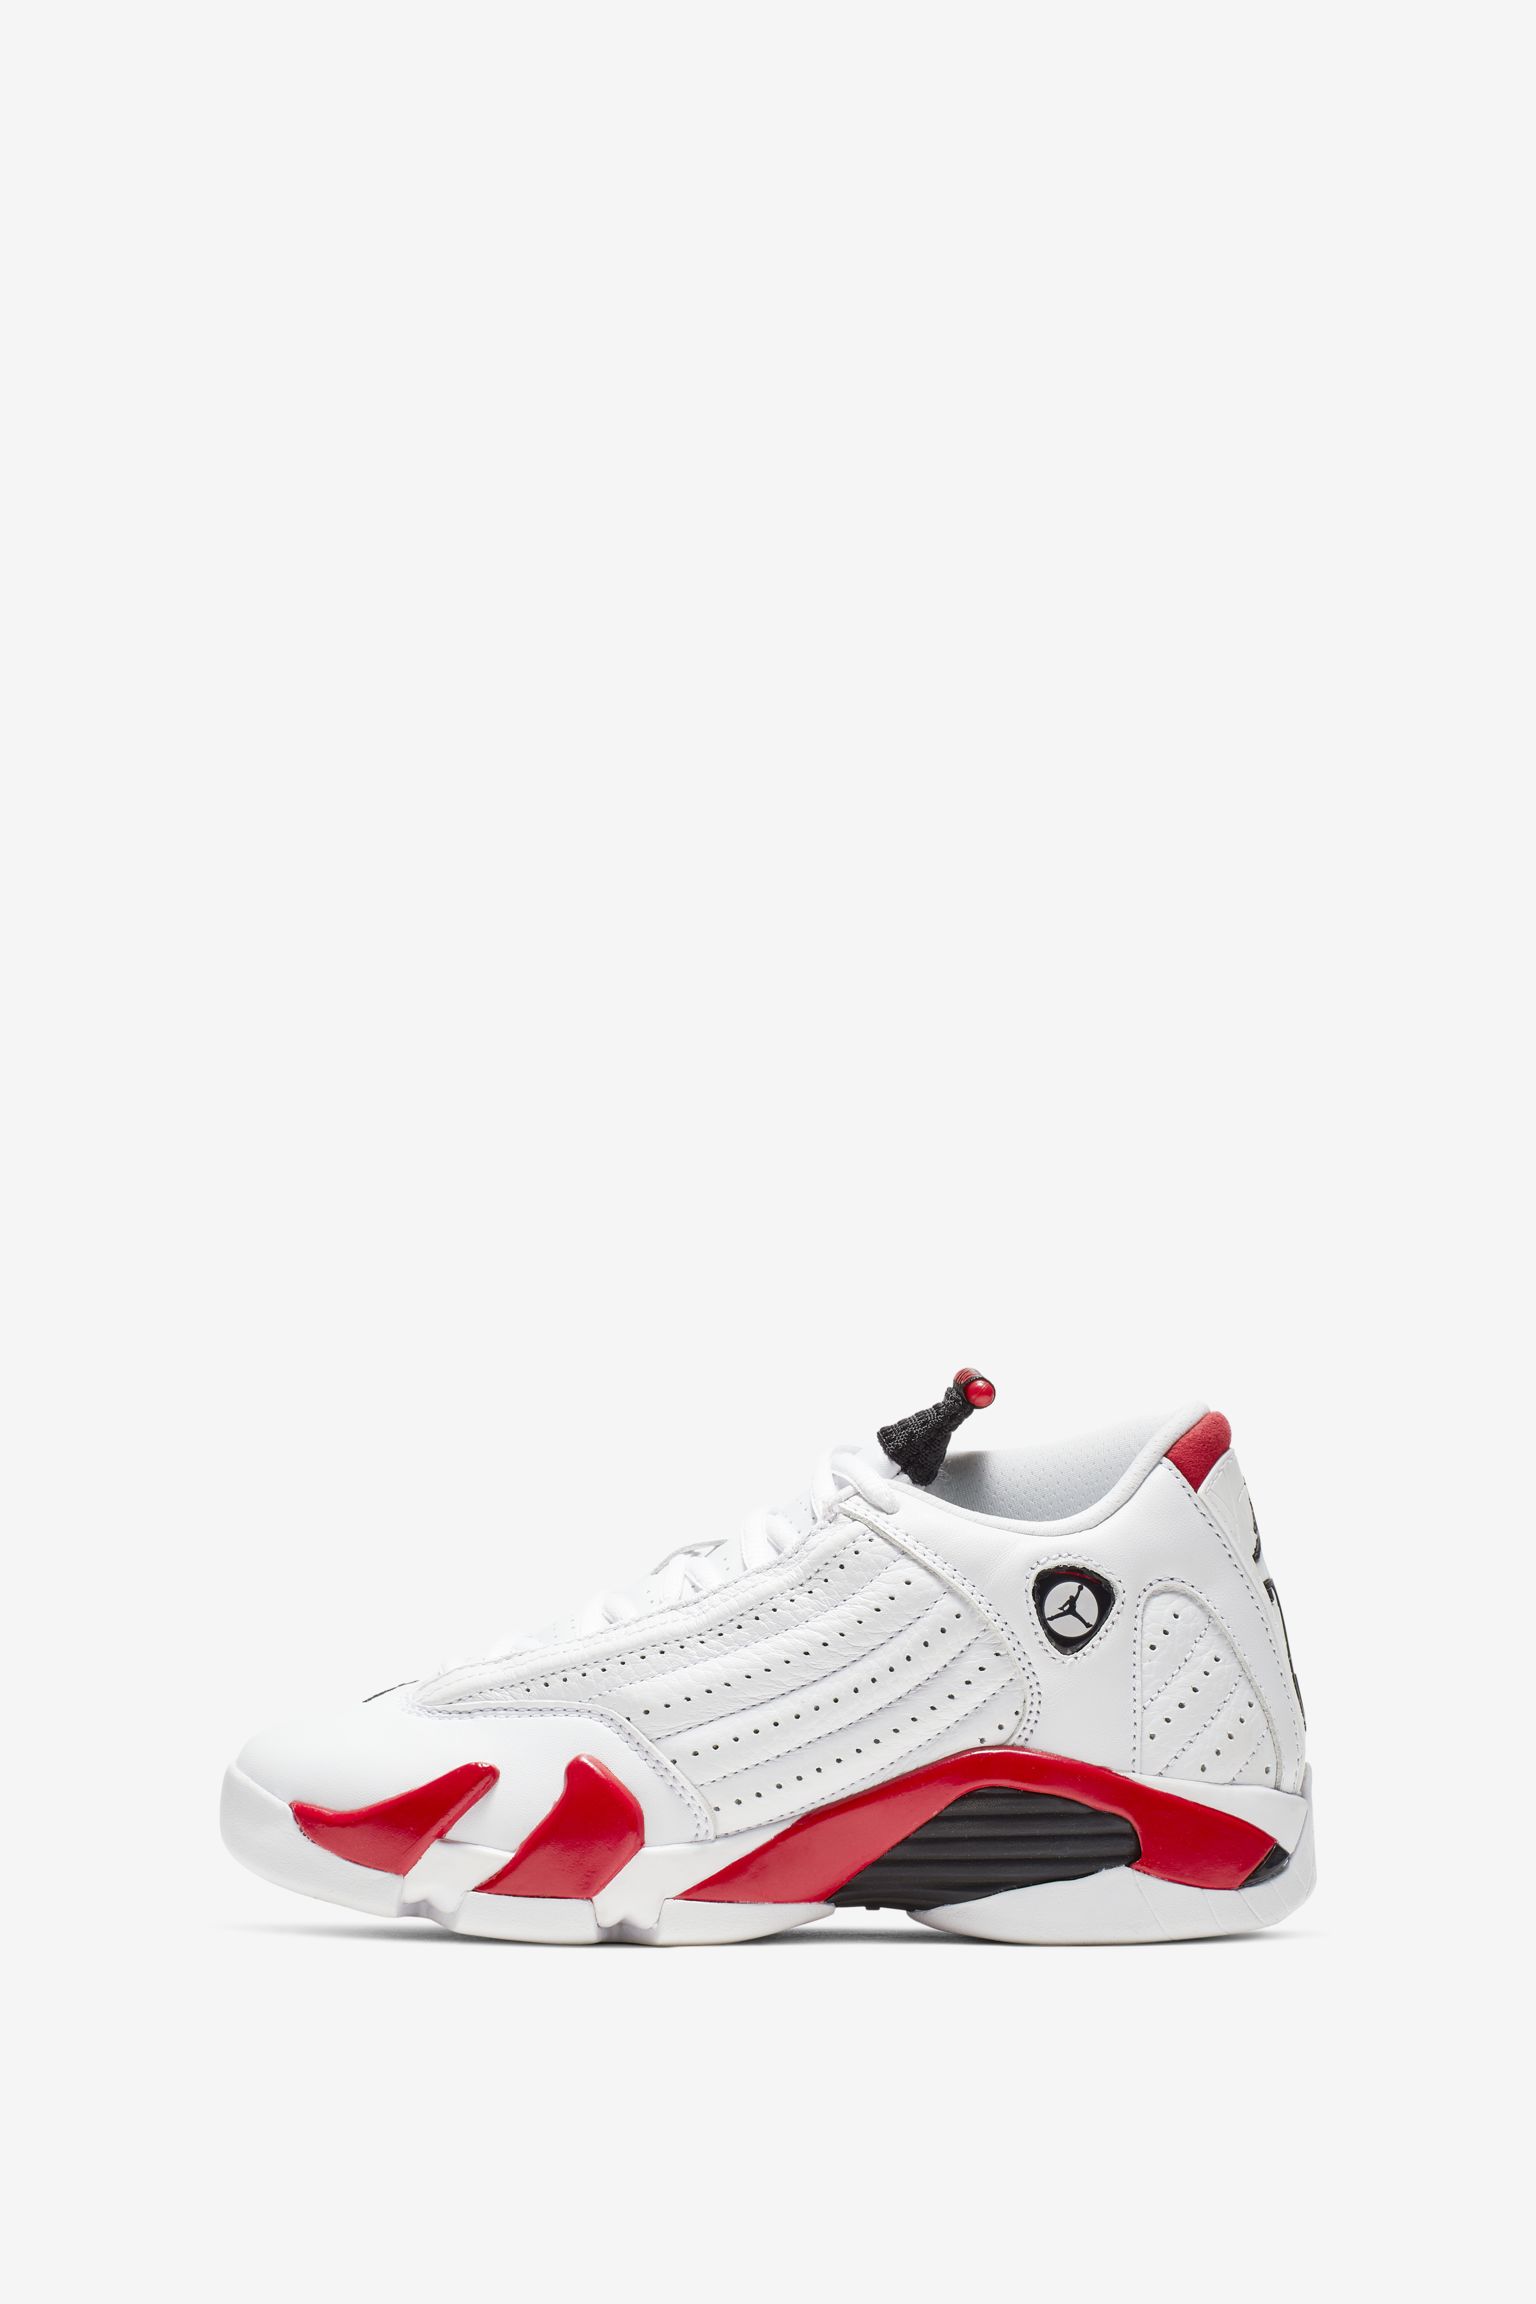 jordan 14 red and white release date